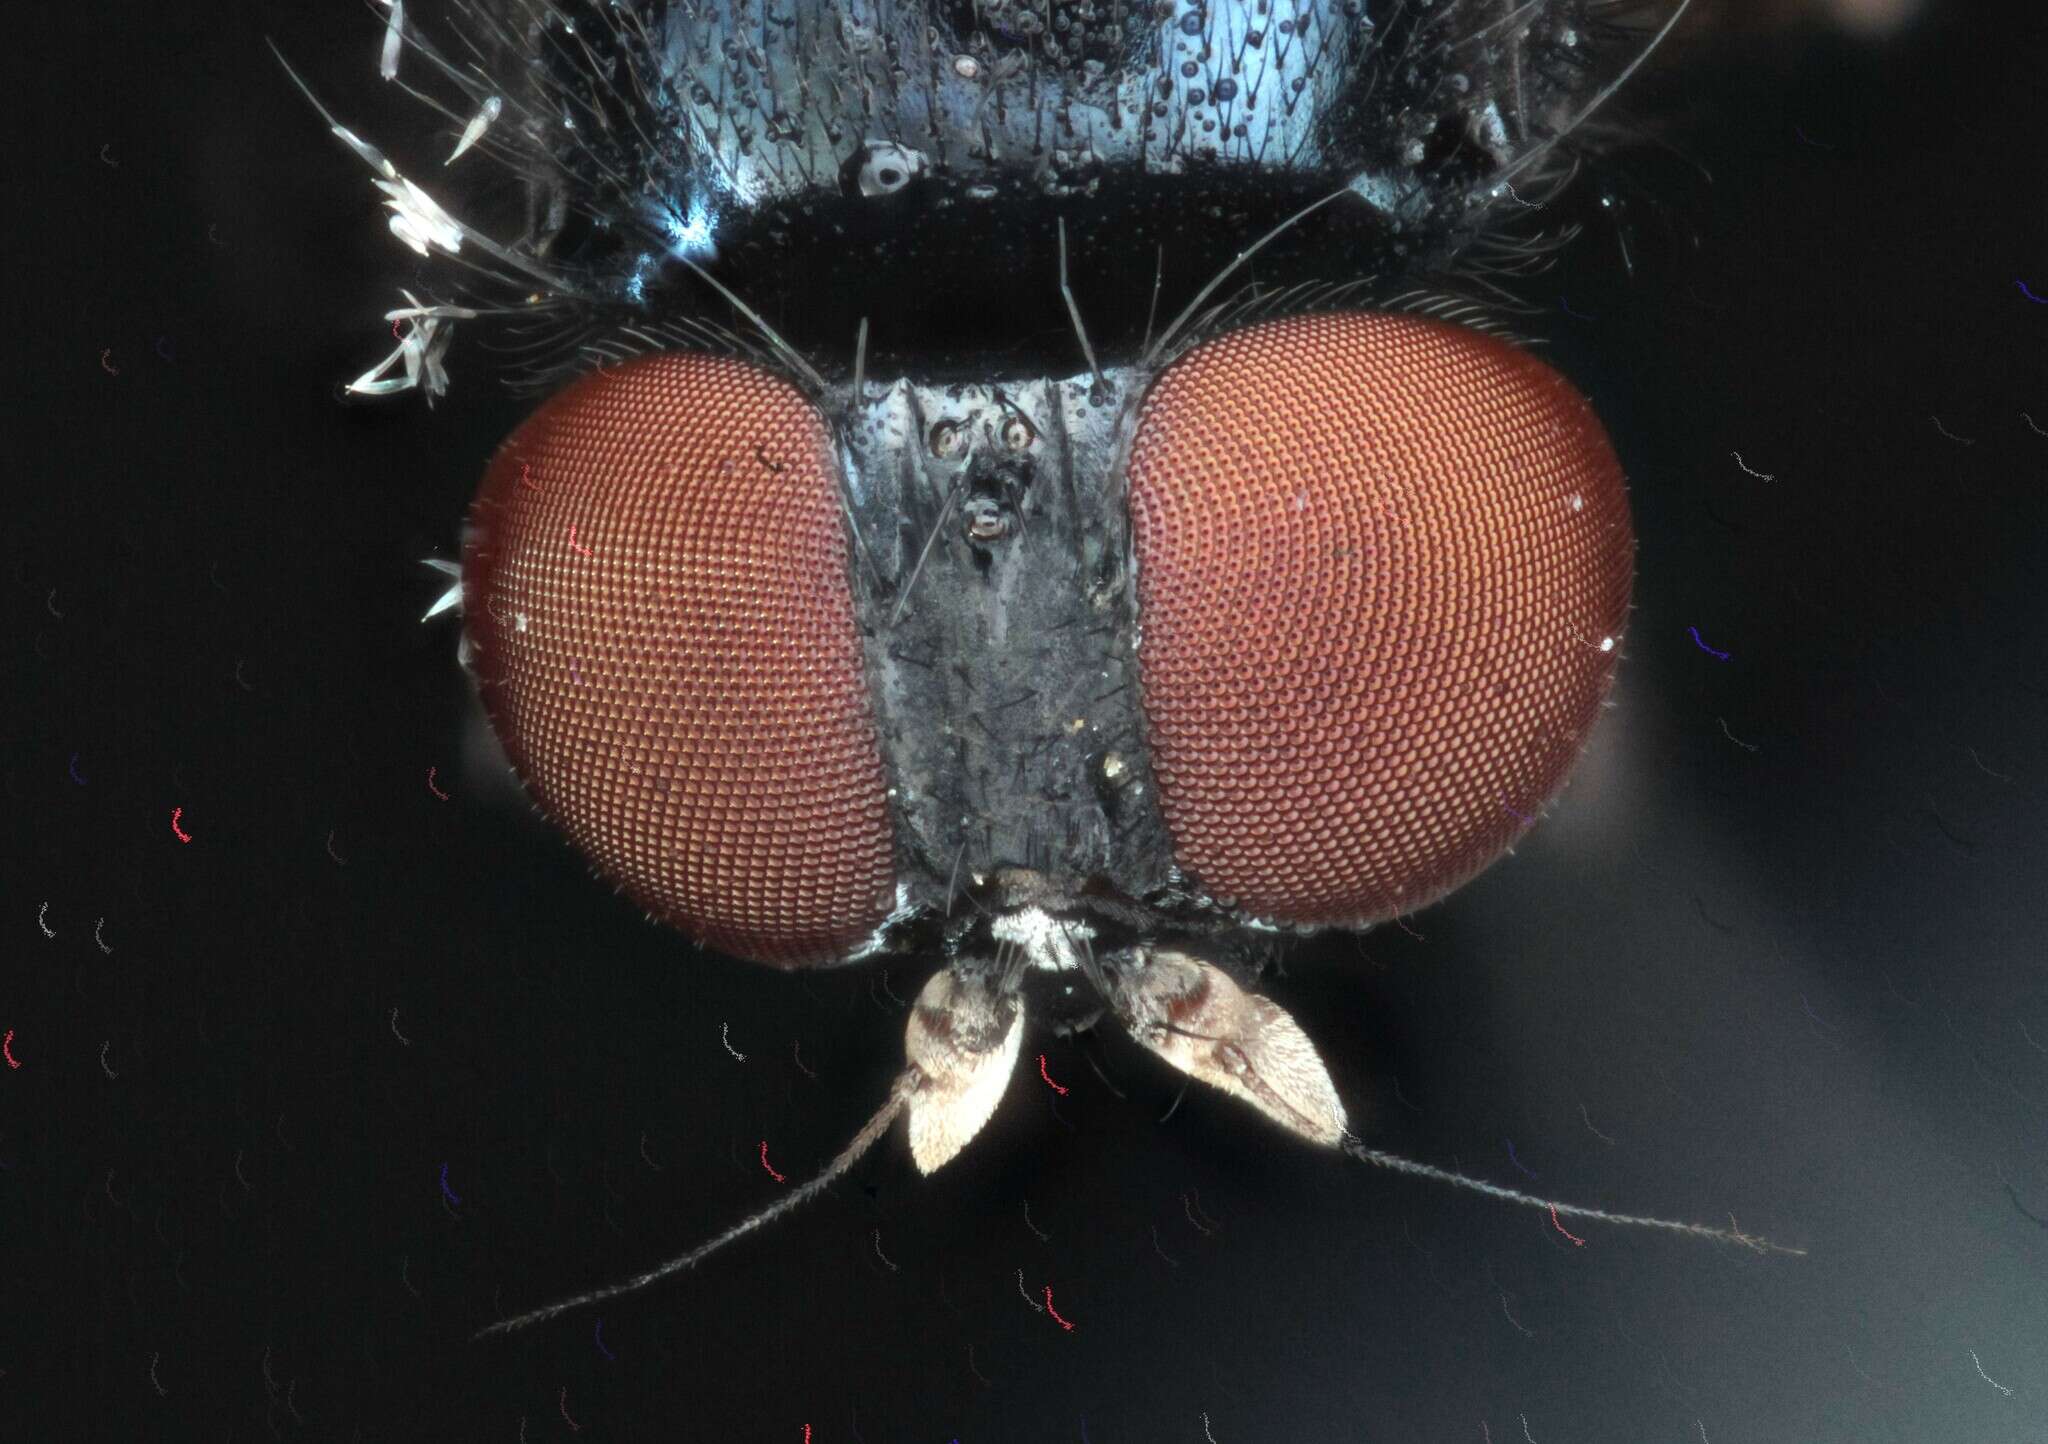 Image of Lance fly